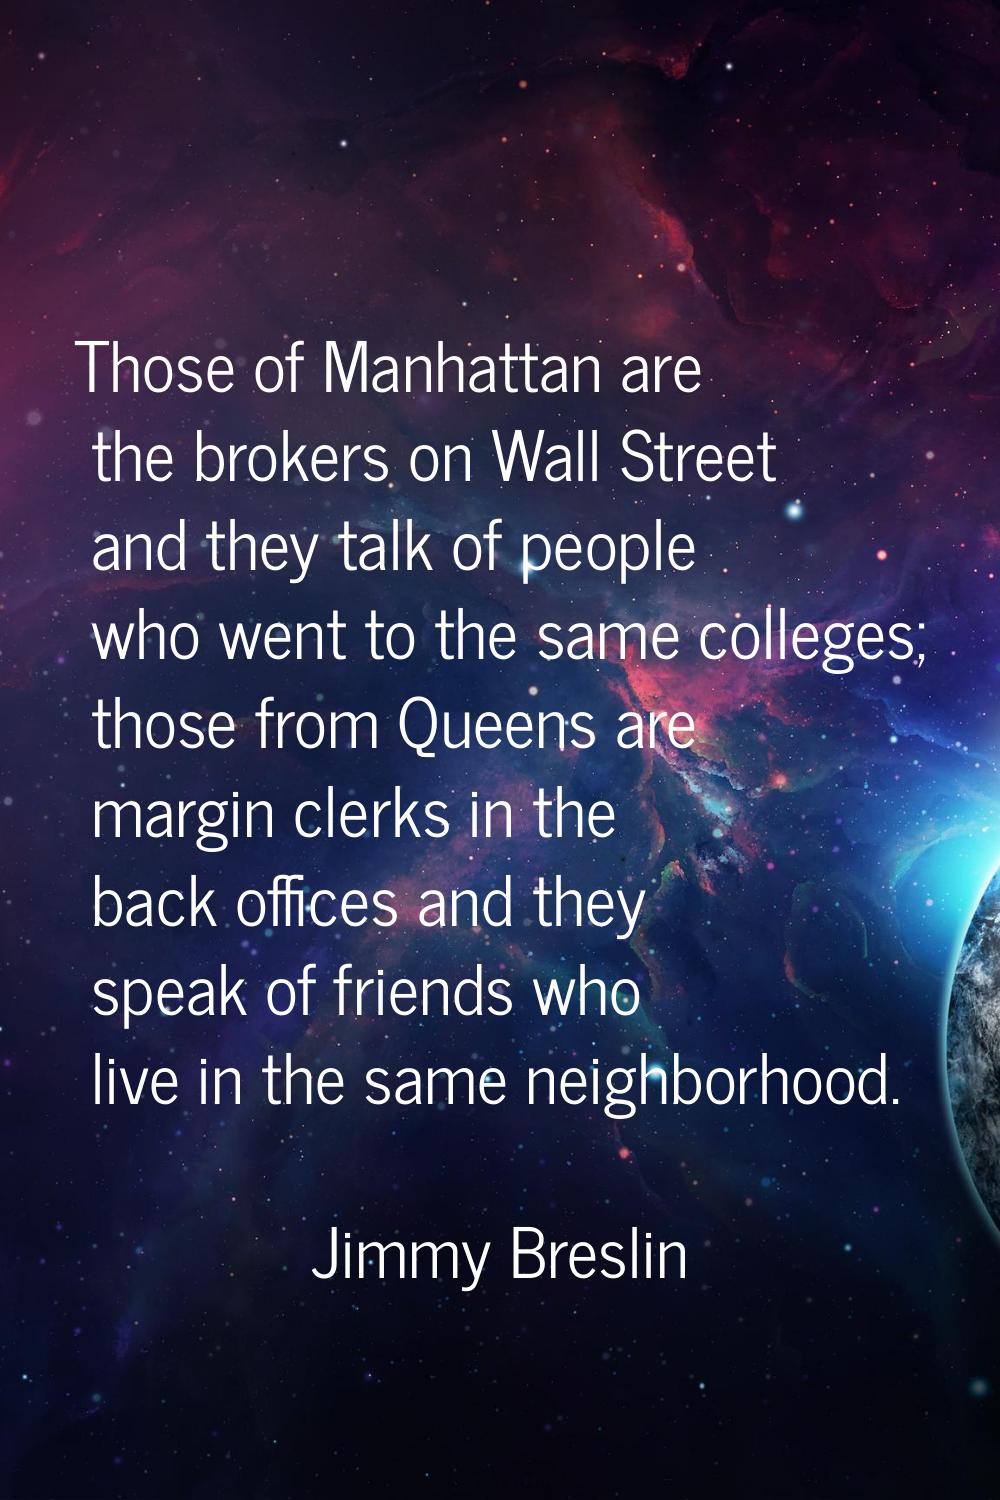 Those of Manhattan are the brokers on Wall Street and they talk of people who went to the same coll